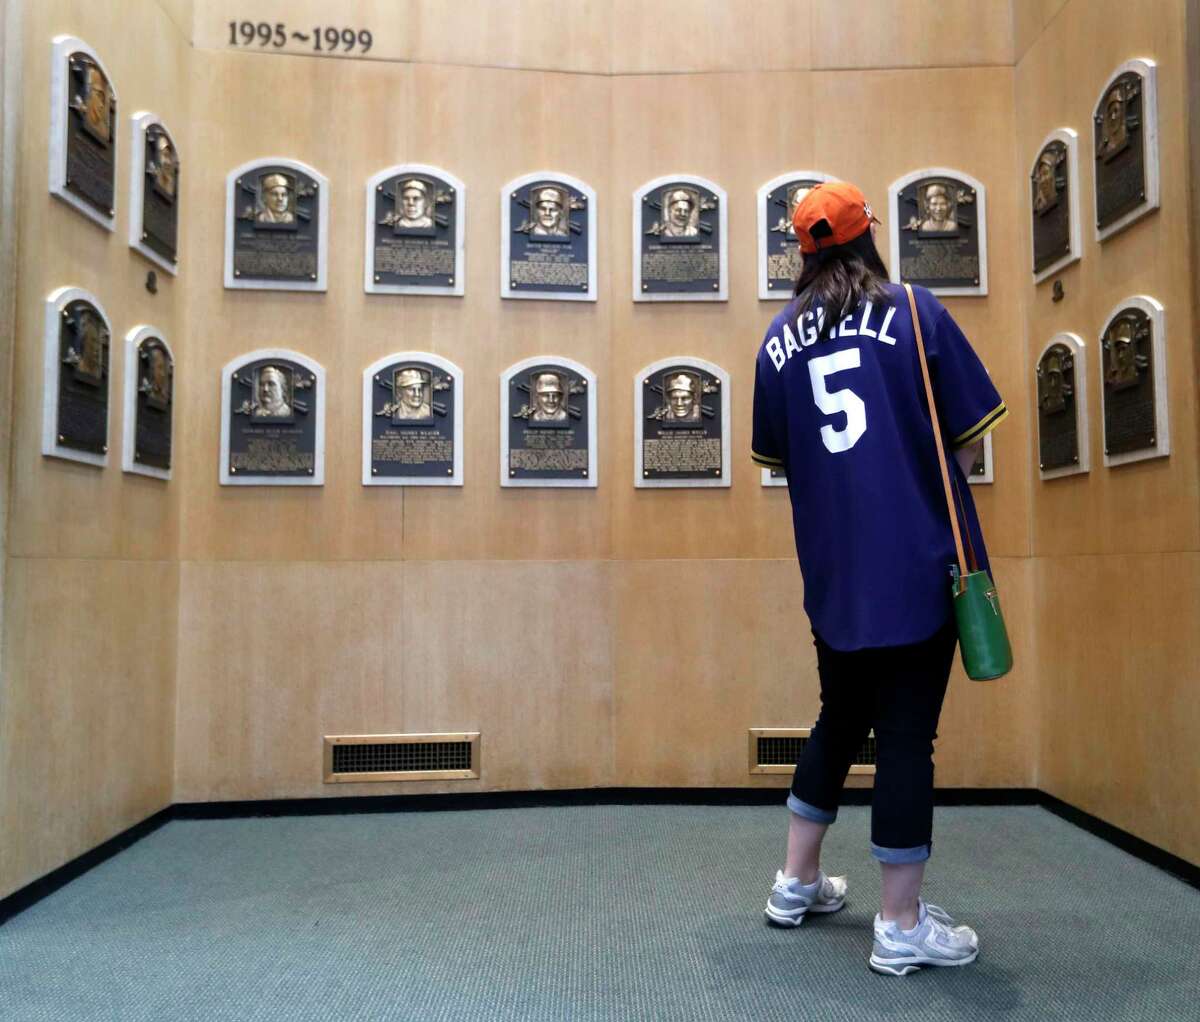 No one elected to baseball's Hall of Fame; Biggio closest